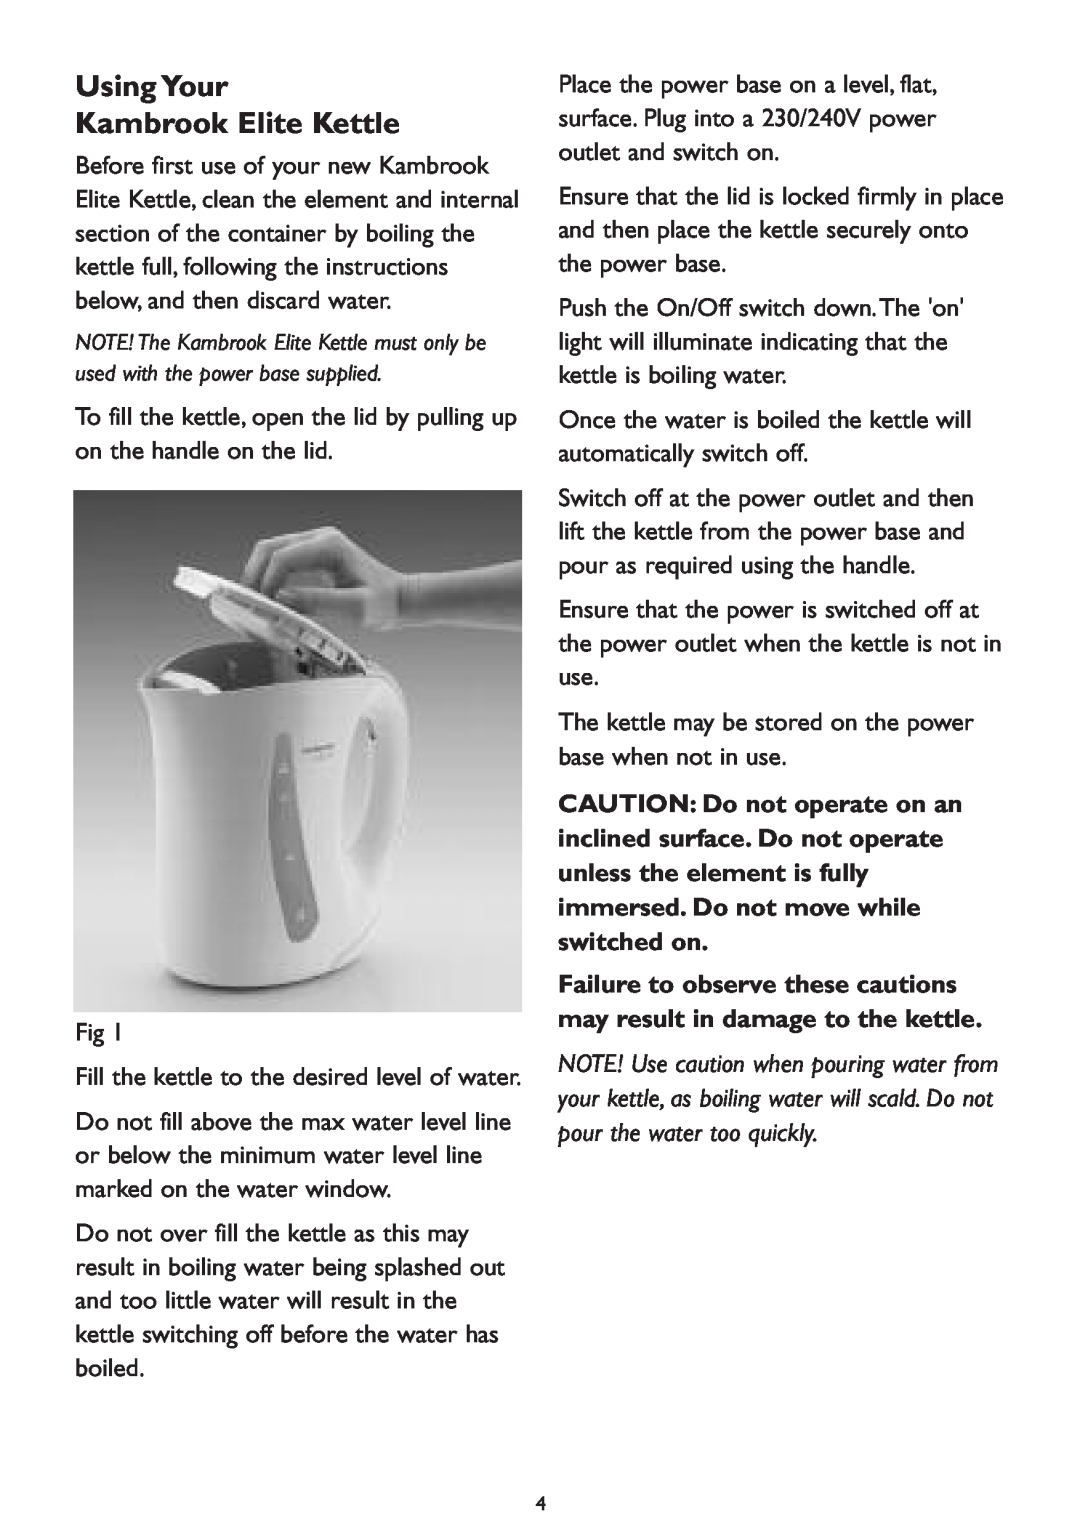 Kambrook KAK5 manual Using Your Kambrook Elite Kettle, Failure to observe these cautions may result in damage to the kettle 